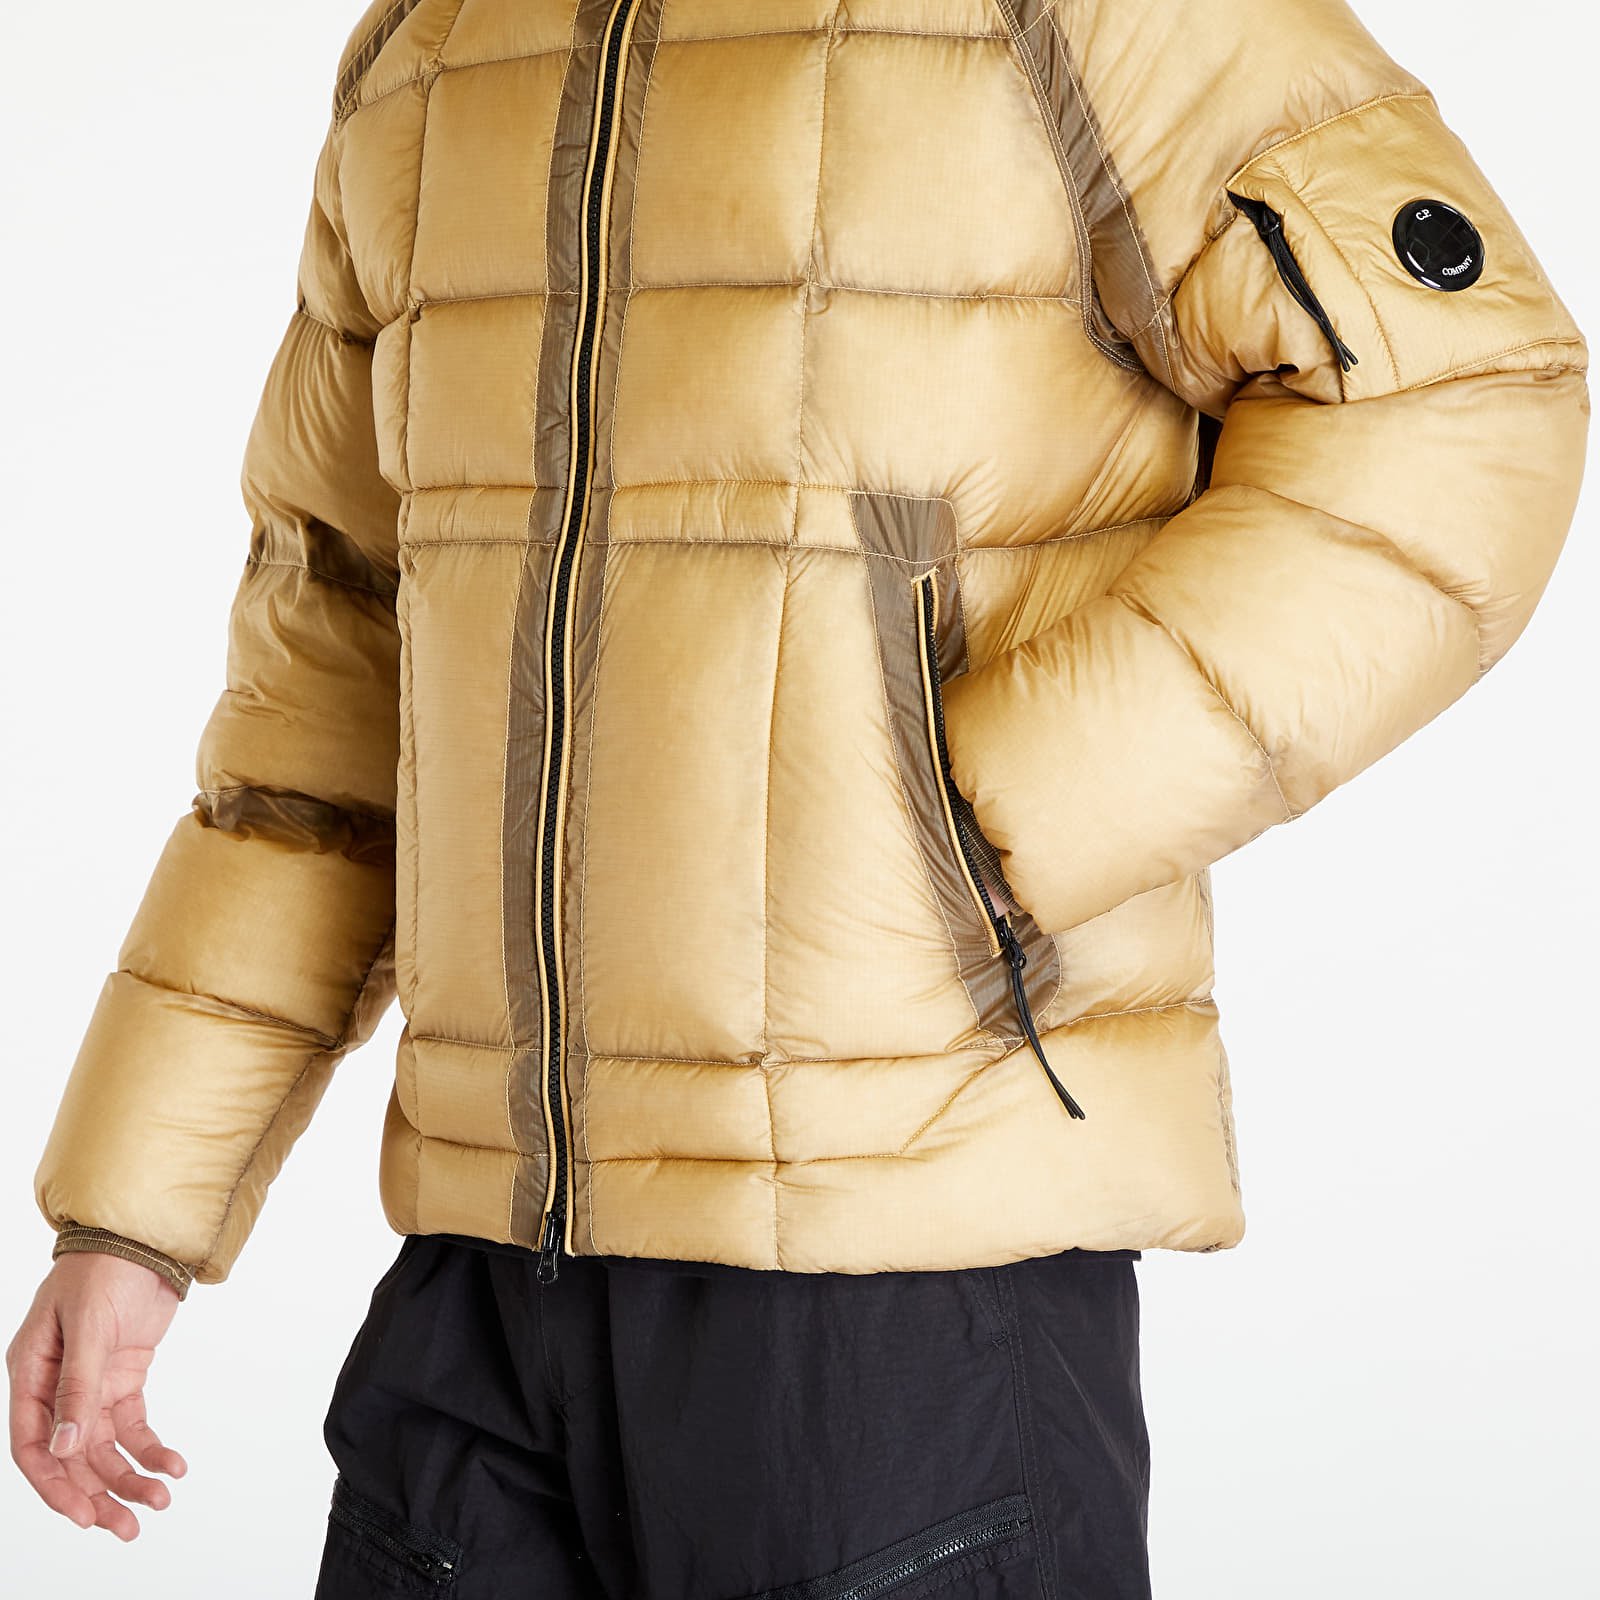 D.D.Shell Hooded Down Jacket